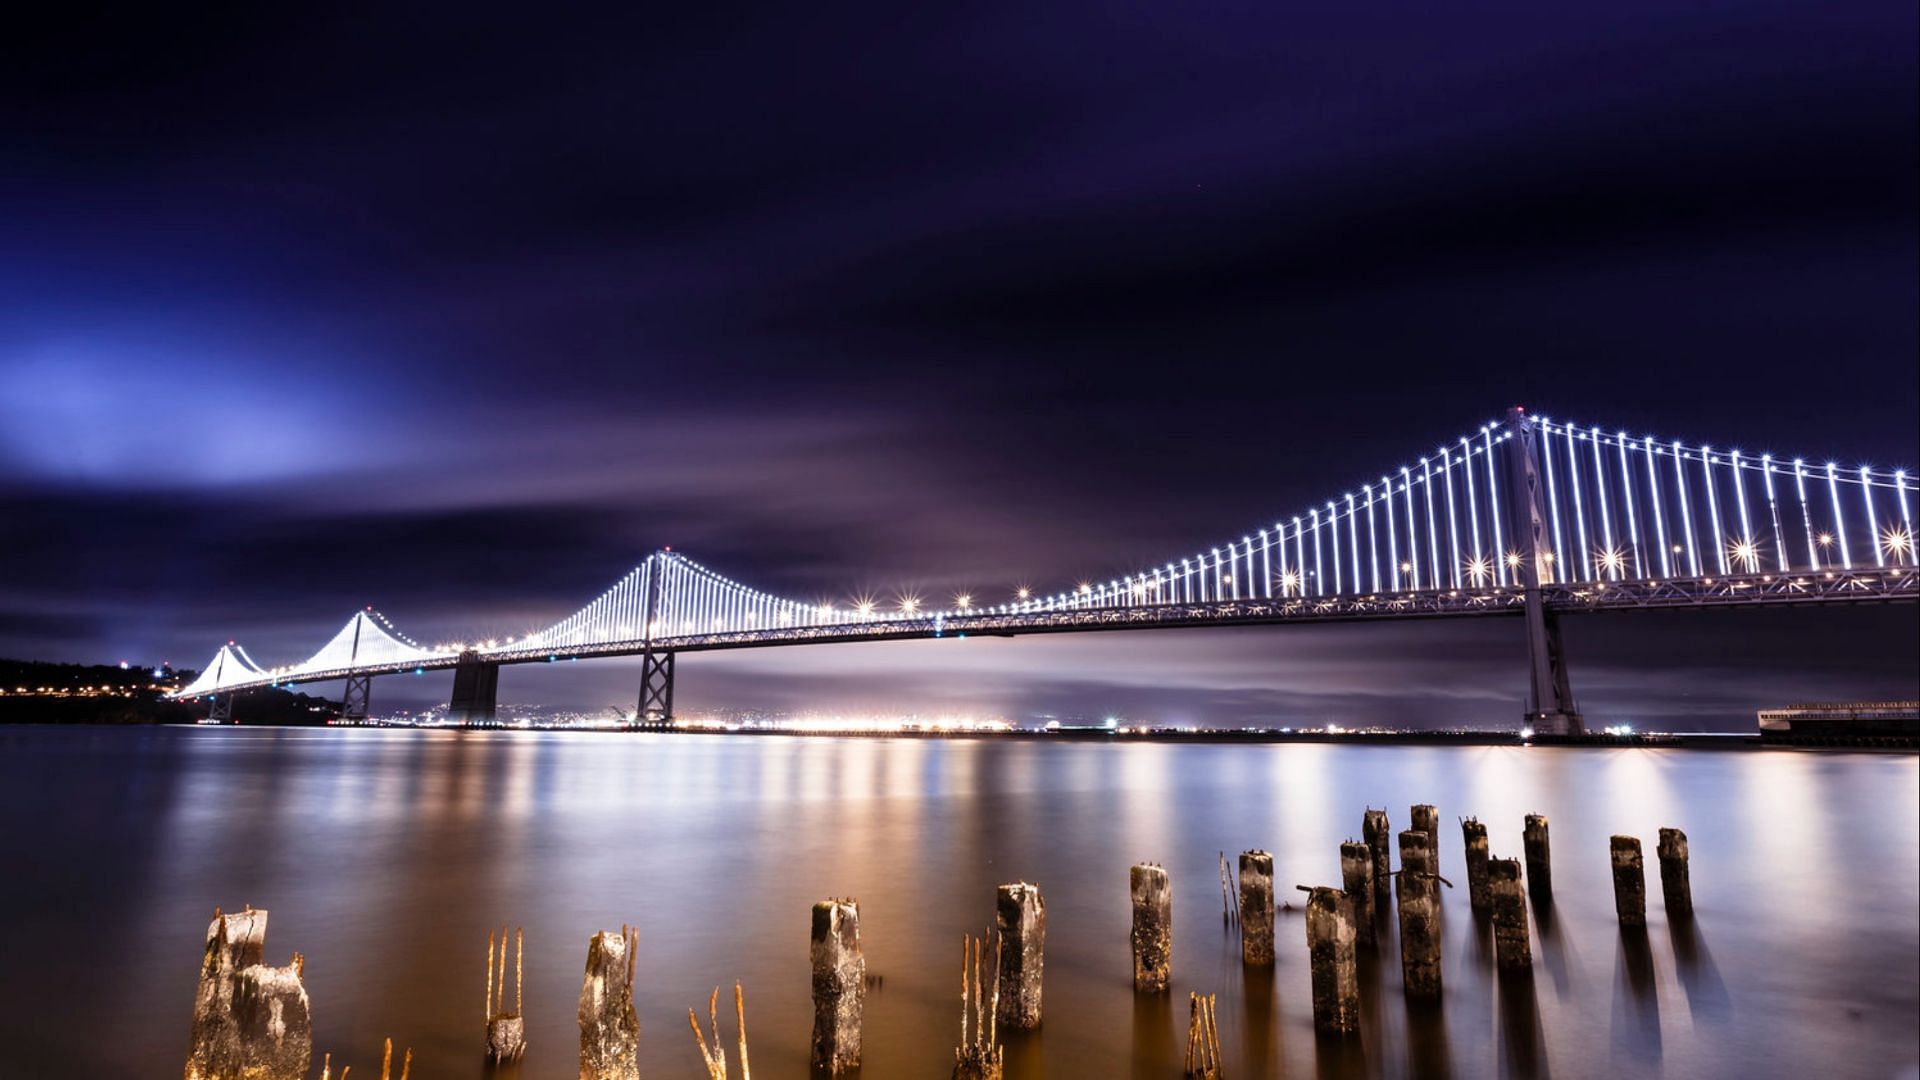 Fundraiser campaign has been launched to help restore the lights on San Francisco